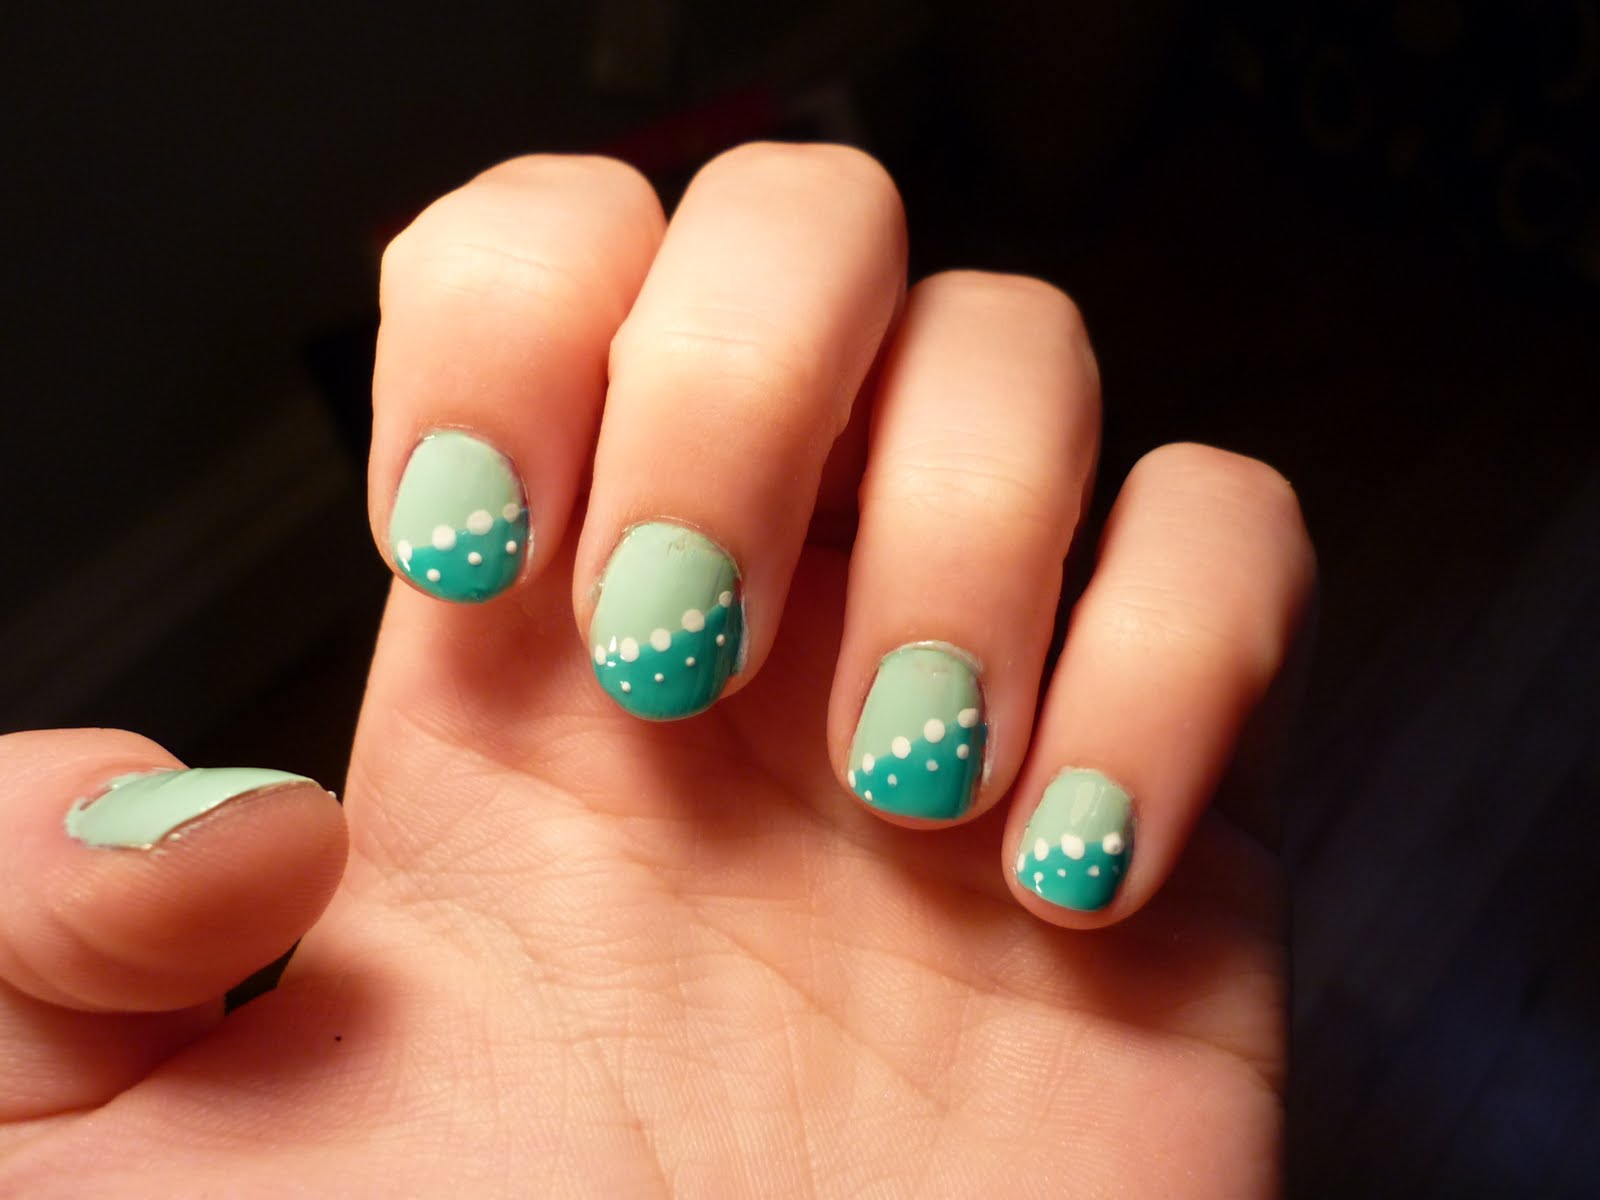 3. Easy DIY Dotted Nail Art - wide 5